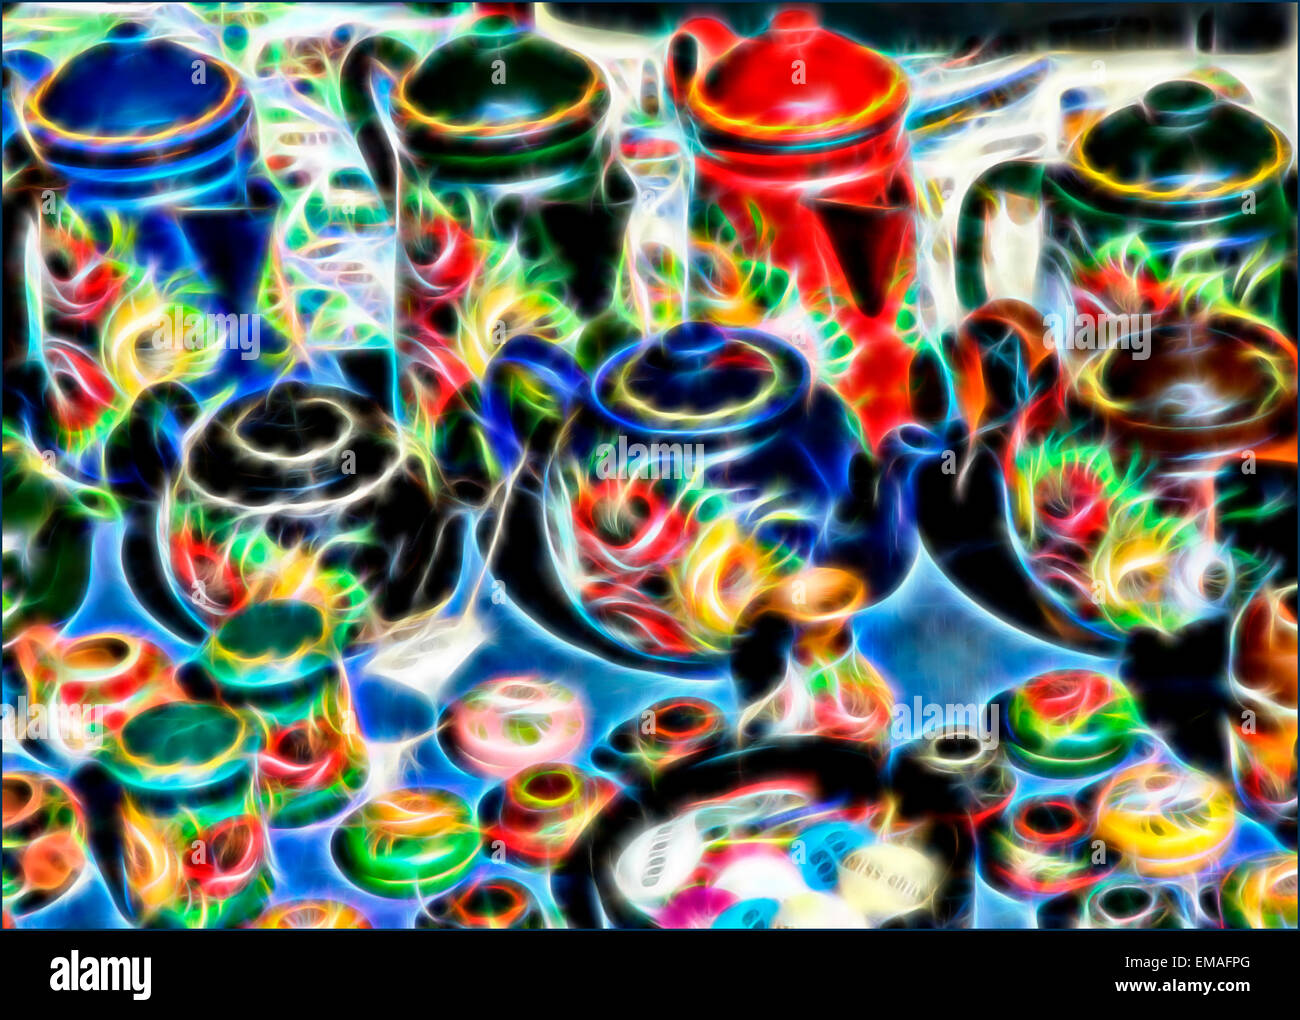 Painted Canal Ware, to be seen on narrow boats on canals in England Stock Photo